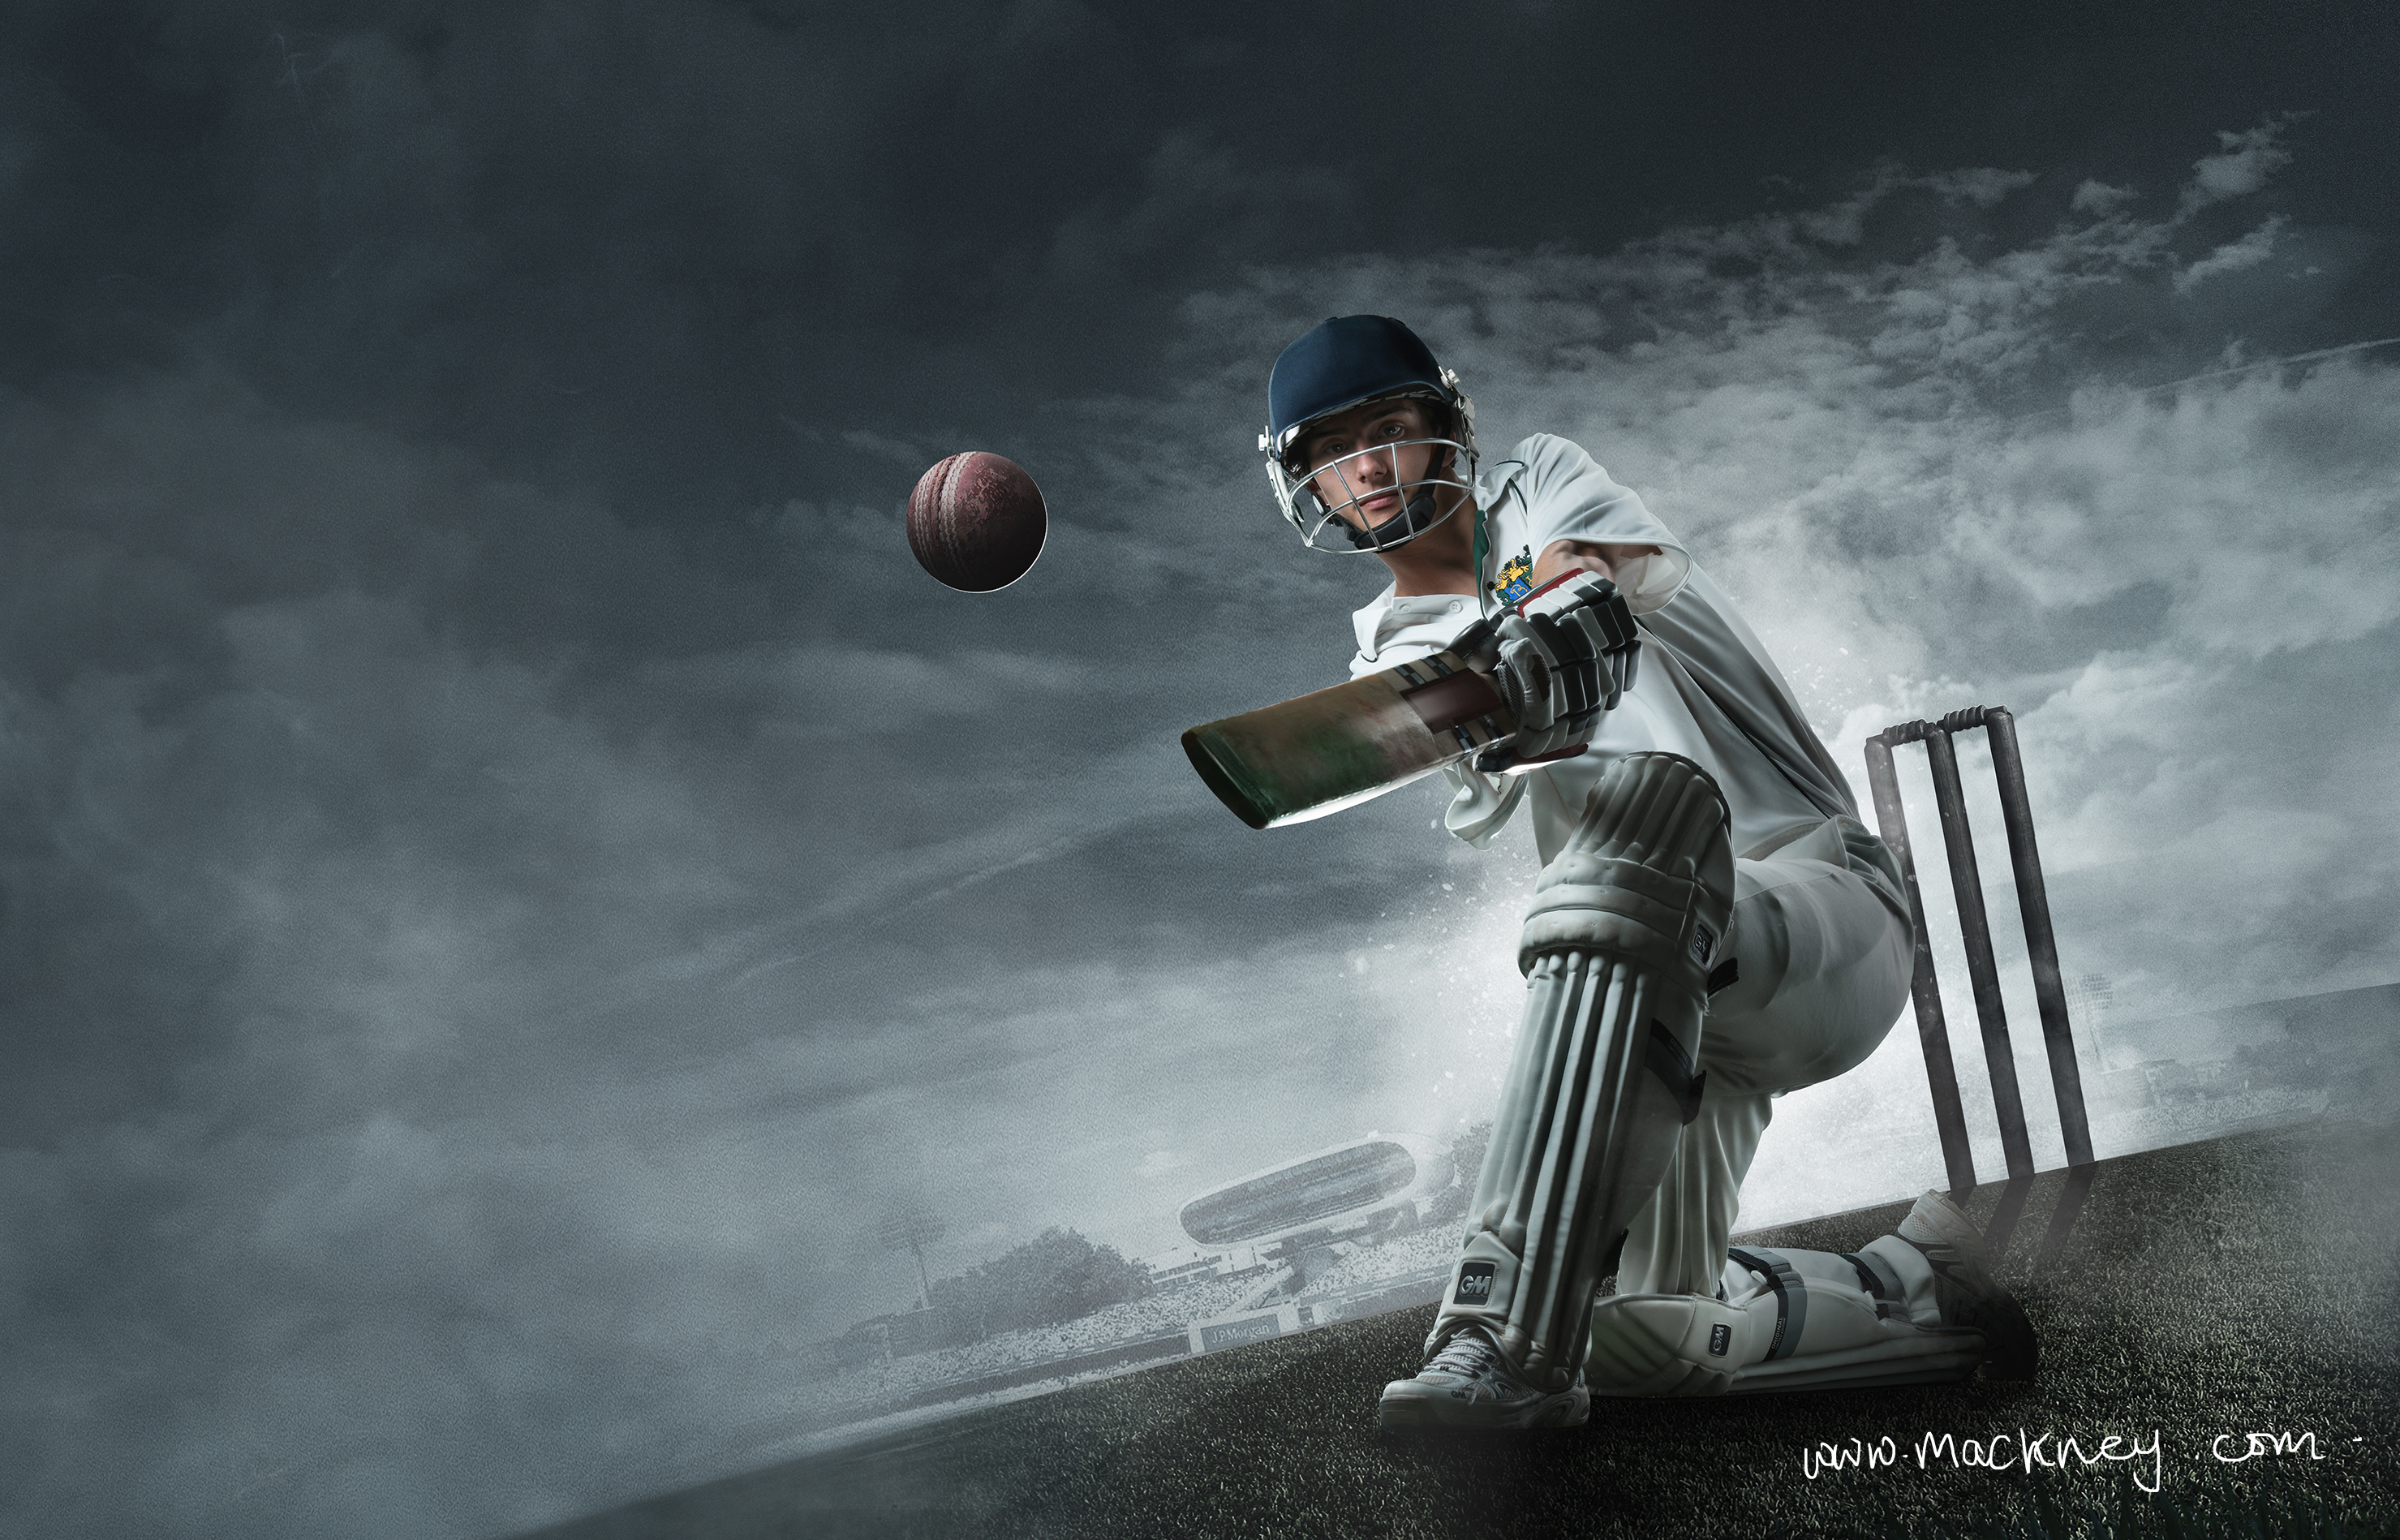 Cricket Wallpapers, HD Cricket Backgrounds, Free Images Download